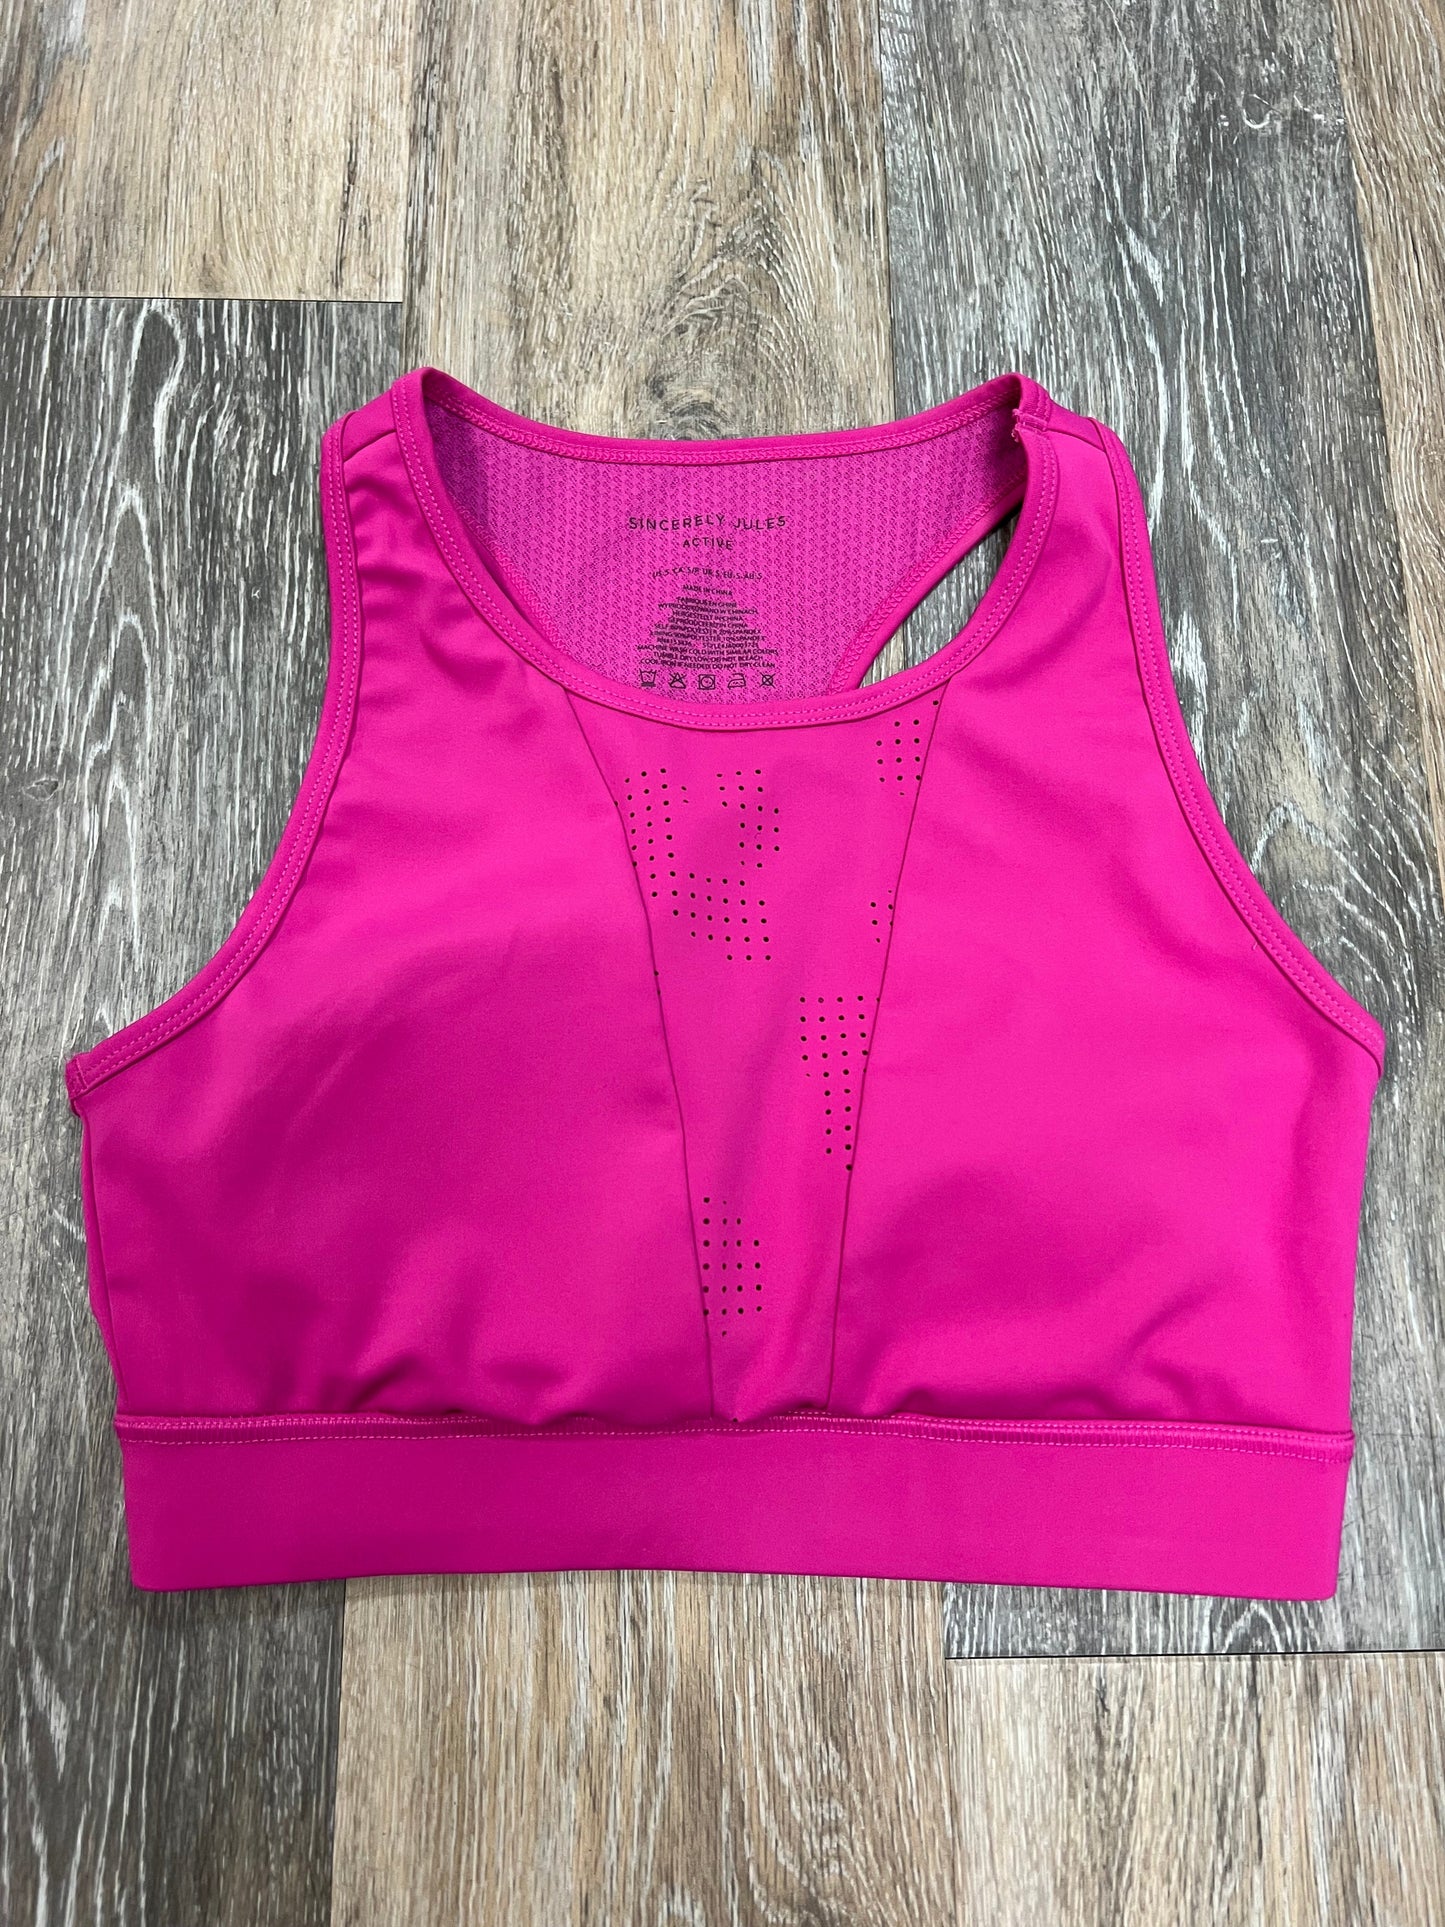 Pink Athletic Bra Sincerely Jules, Size S